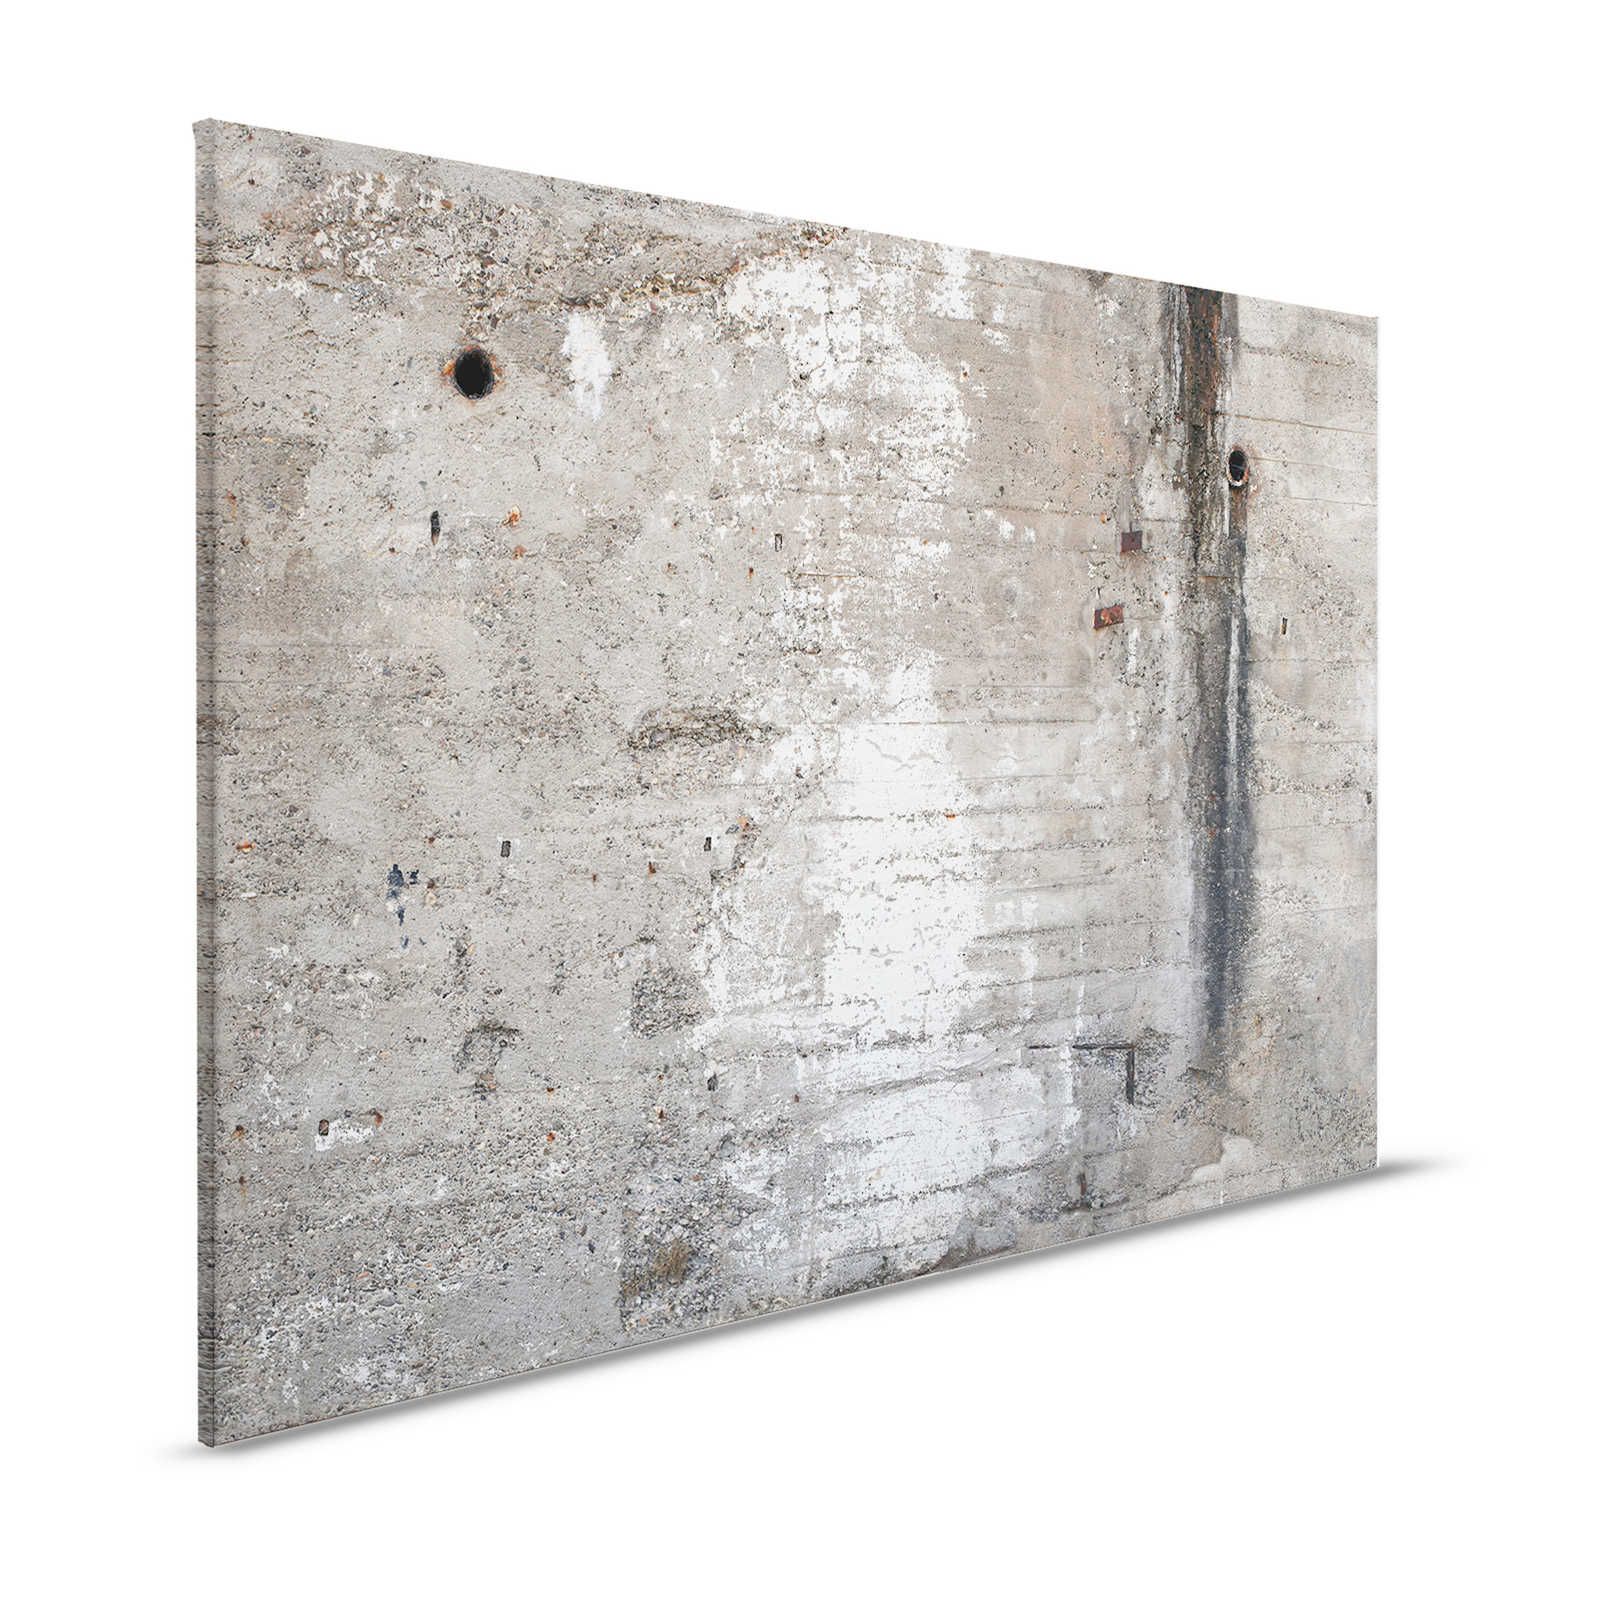 Concrete Wall Canvas Painting Industrial Style Rustic - 1.20 m x 0.80 m
